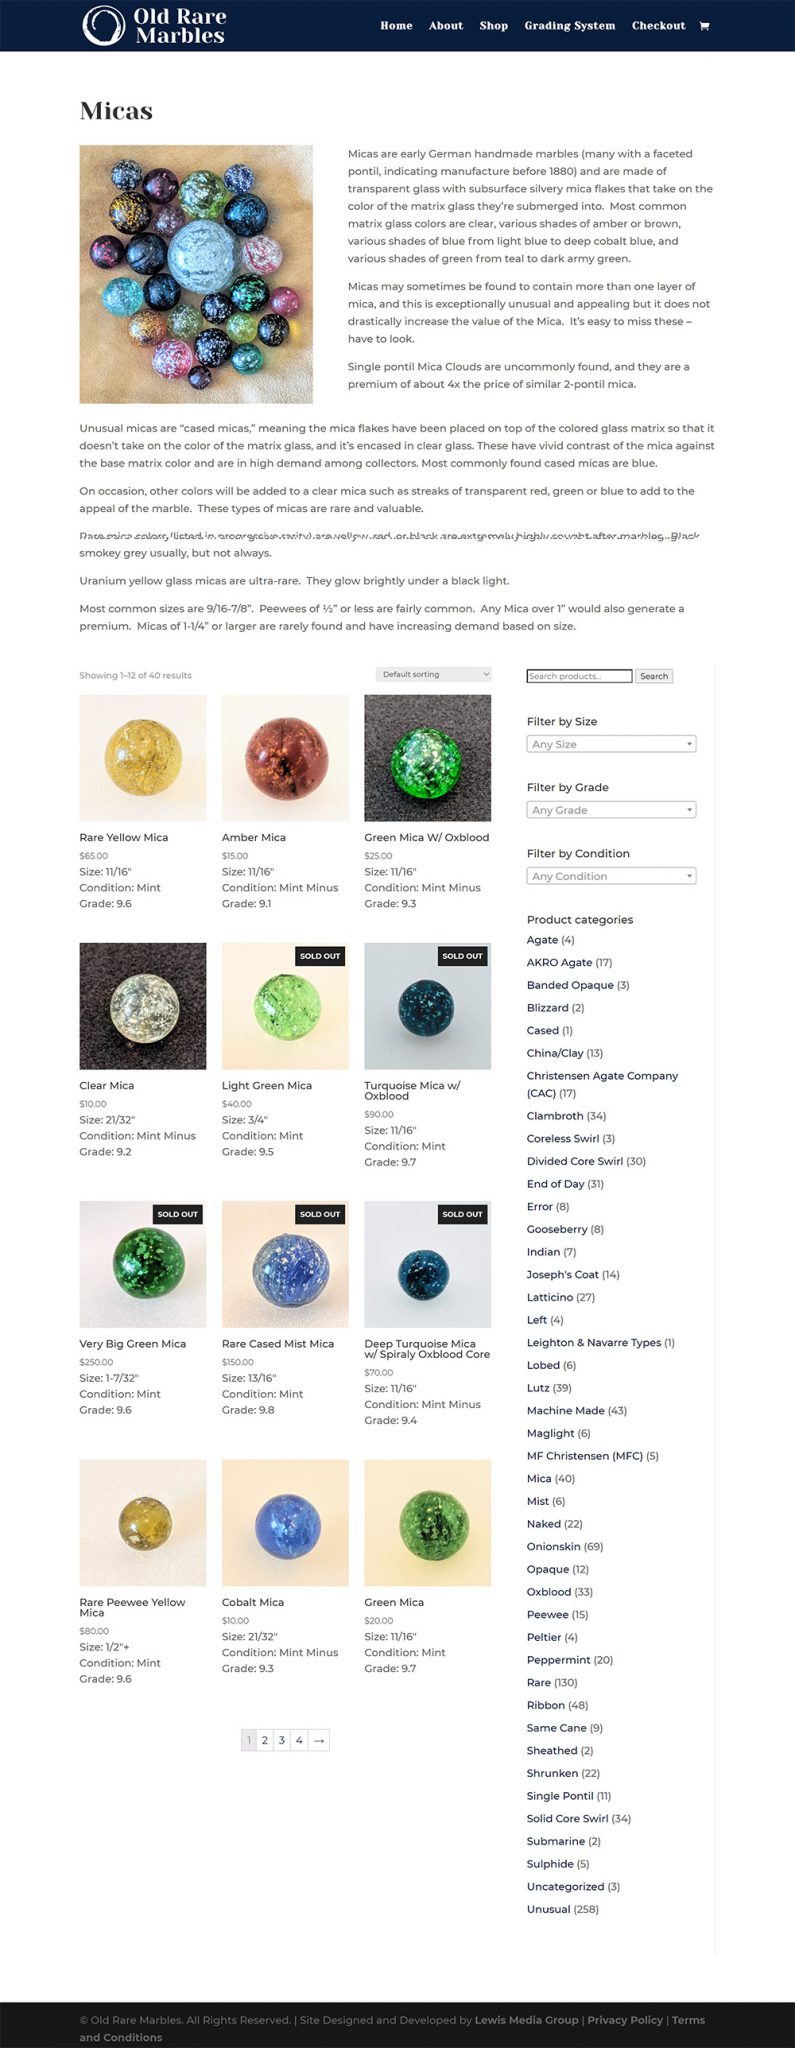 Old Rare Marbles Product page after design